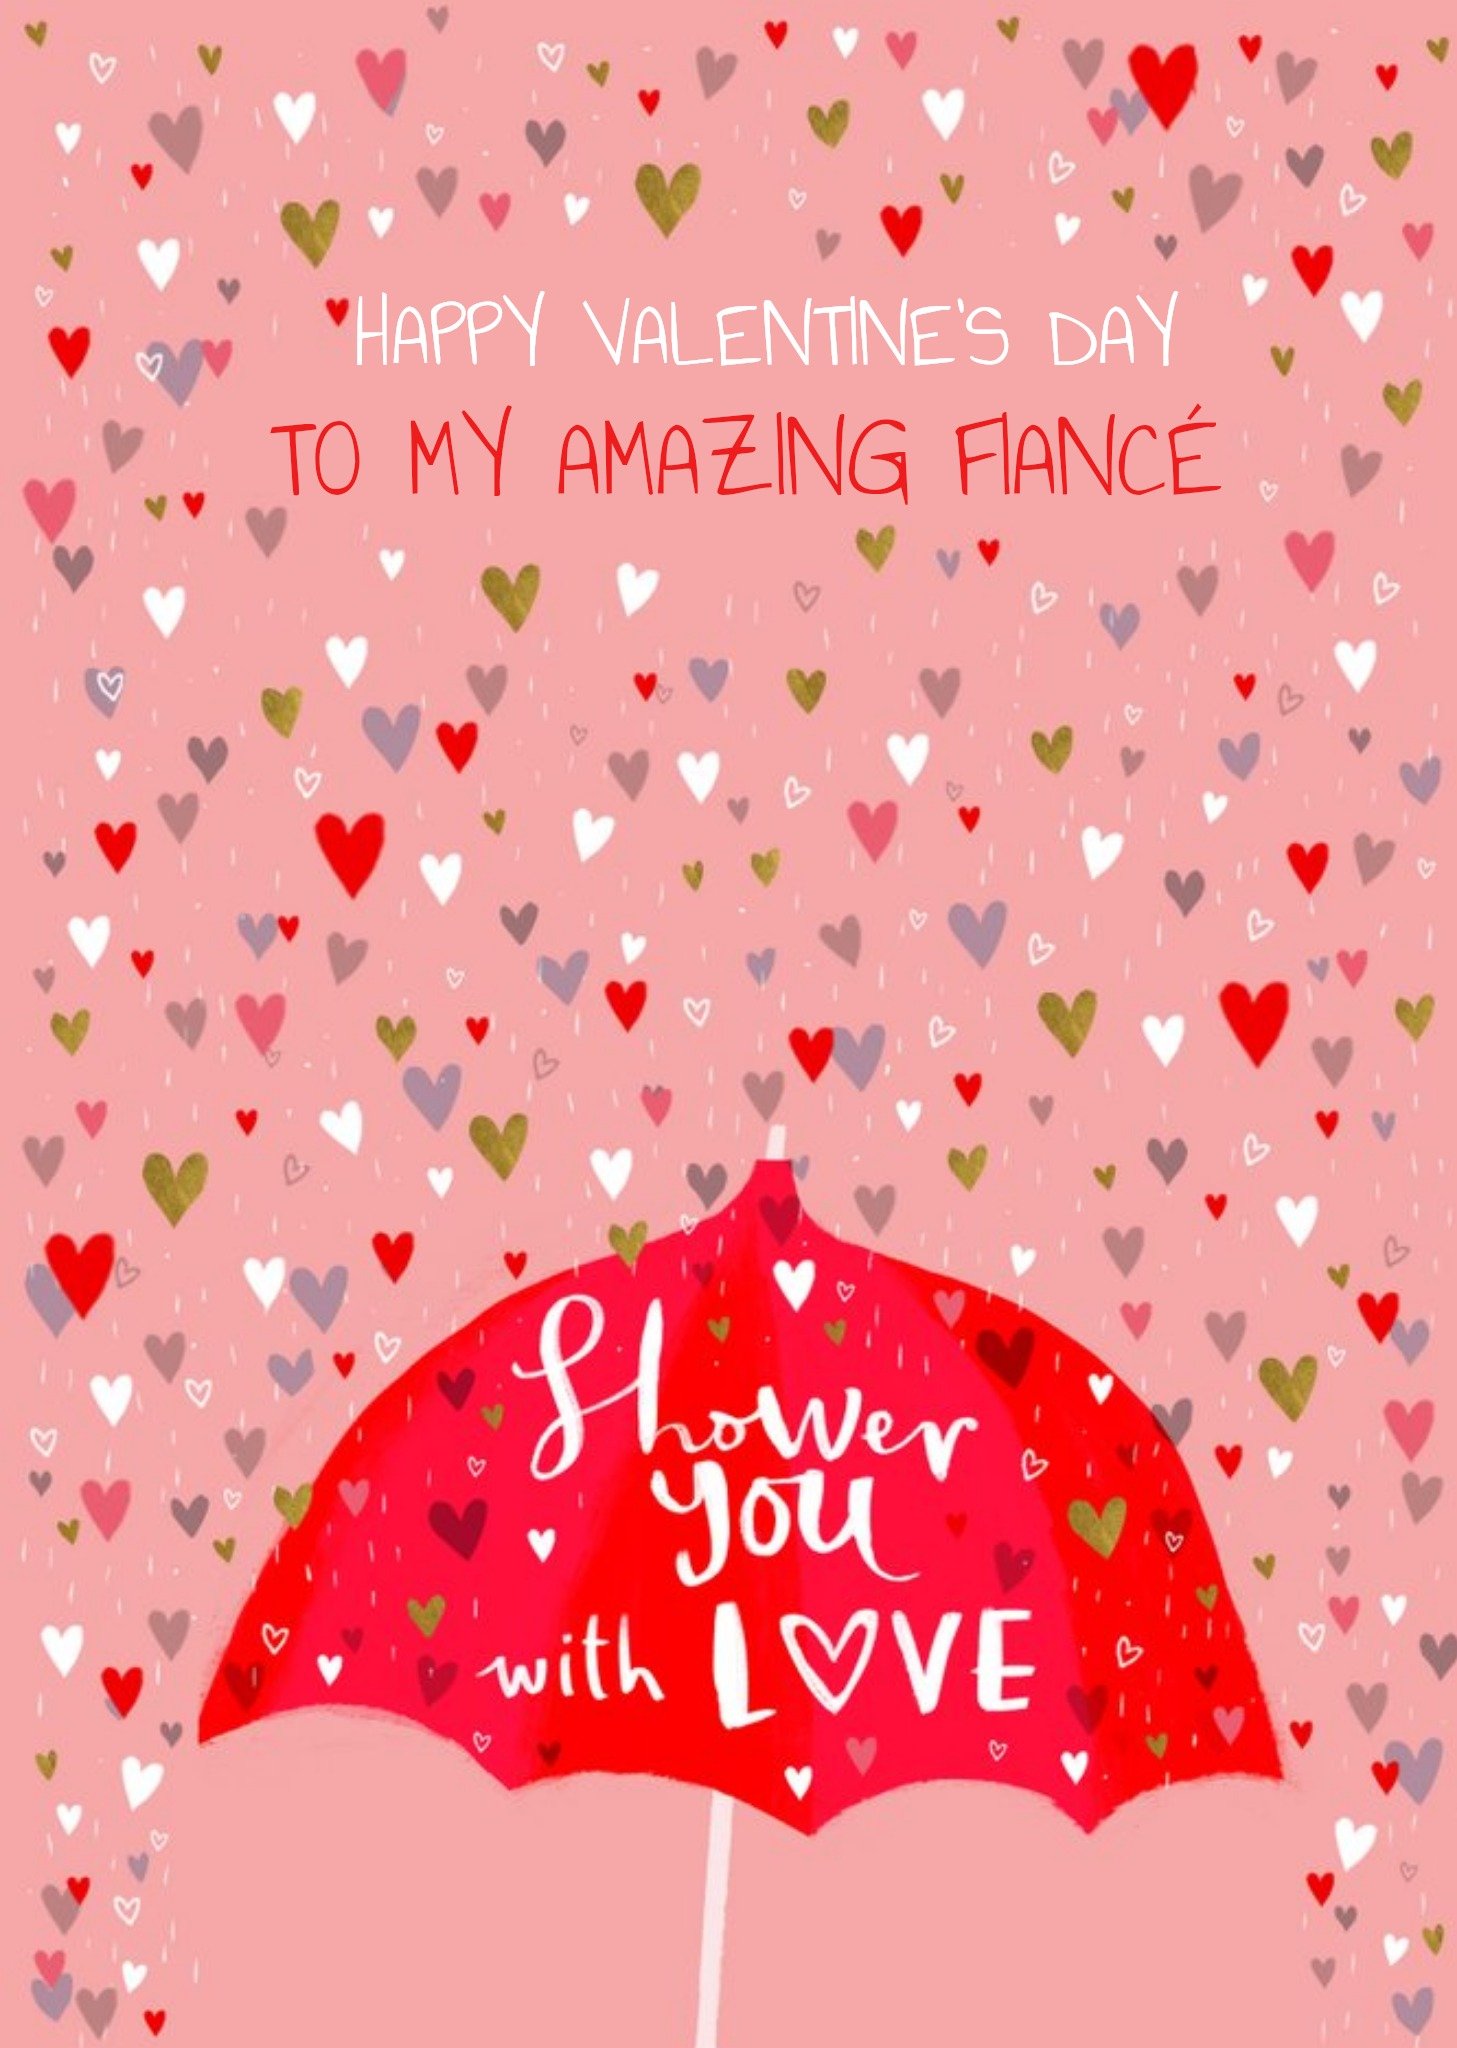 Moonpig Shower You With Love Amazing Fiance Illustrated Valentine's Day Card Ecard